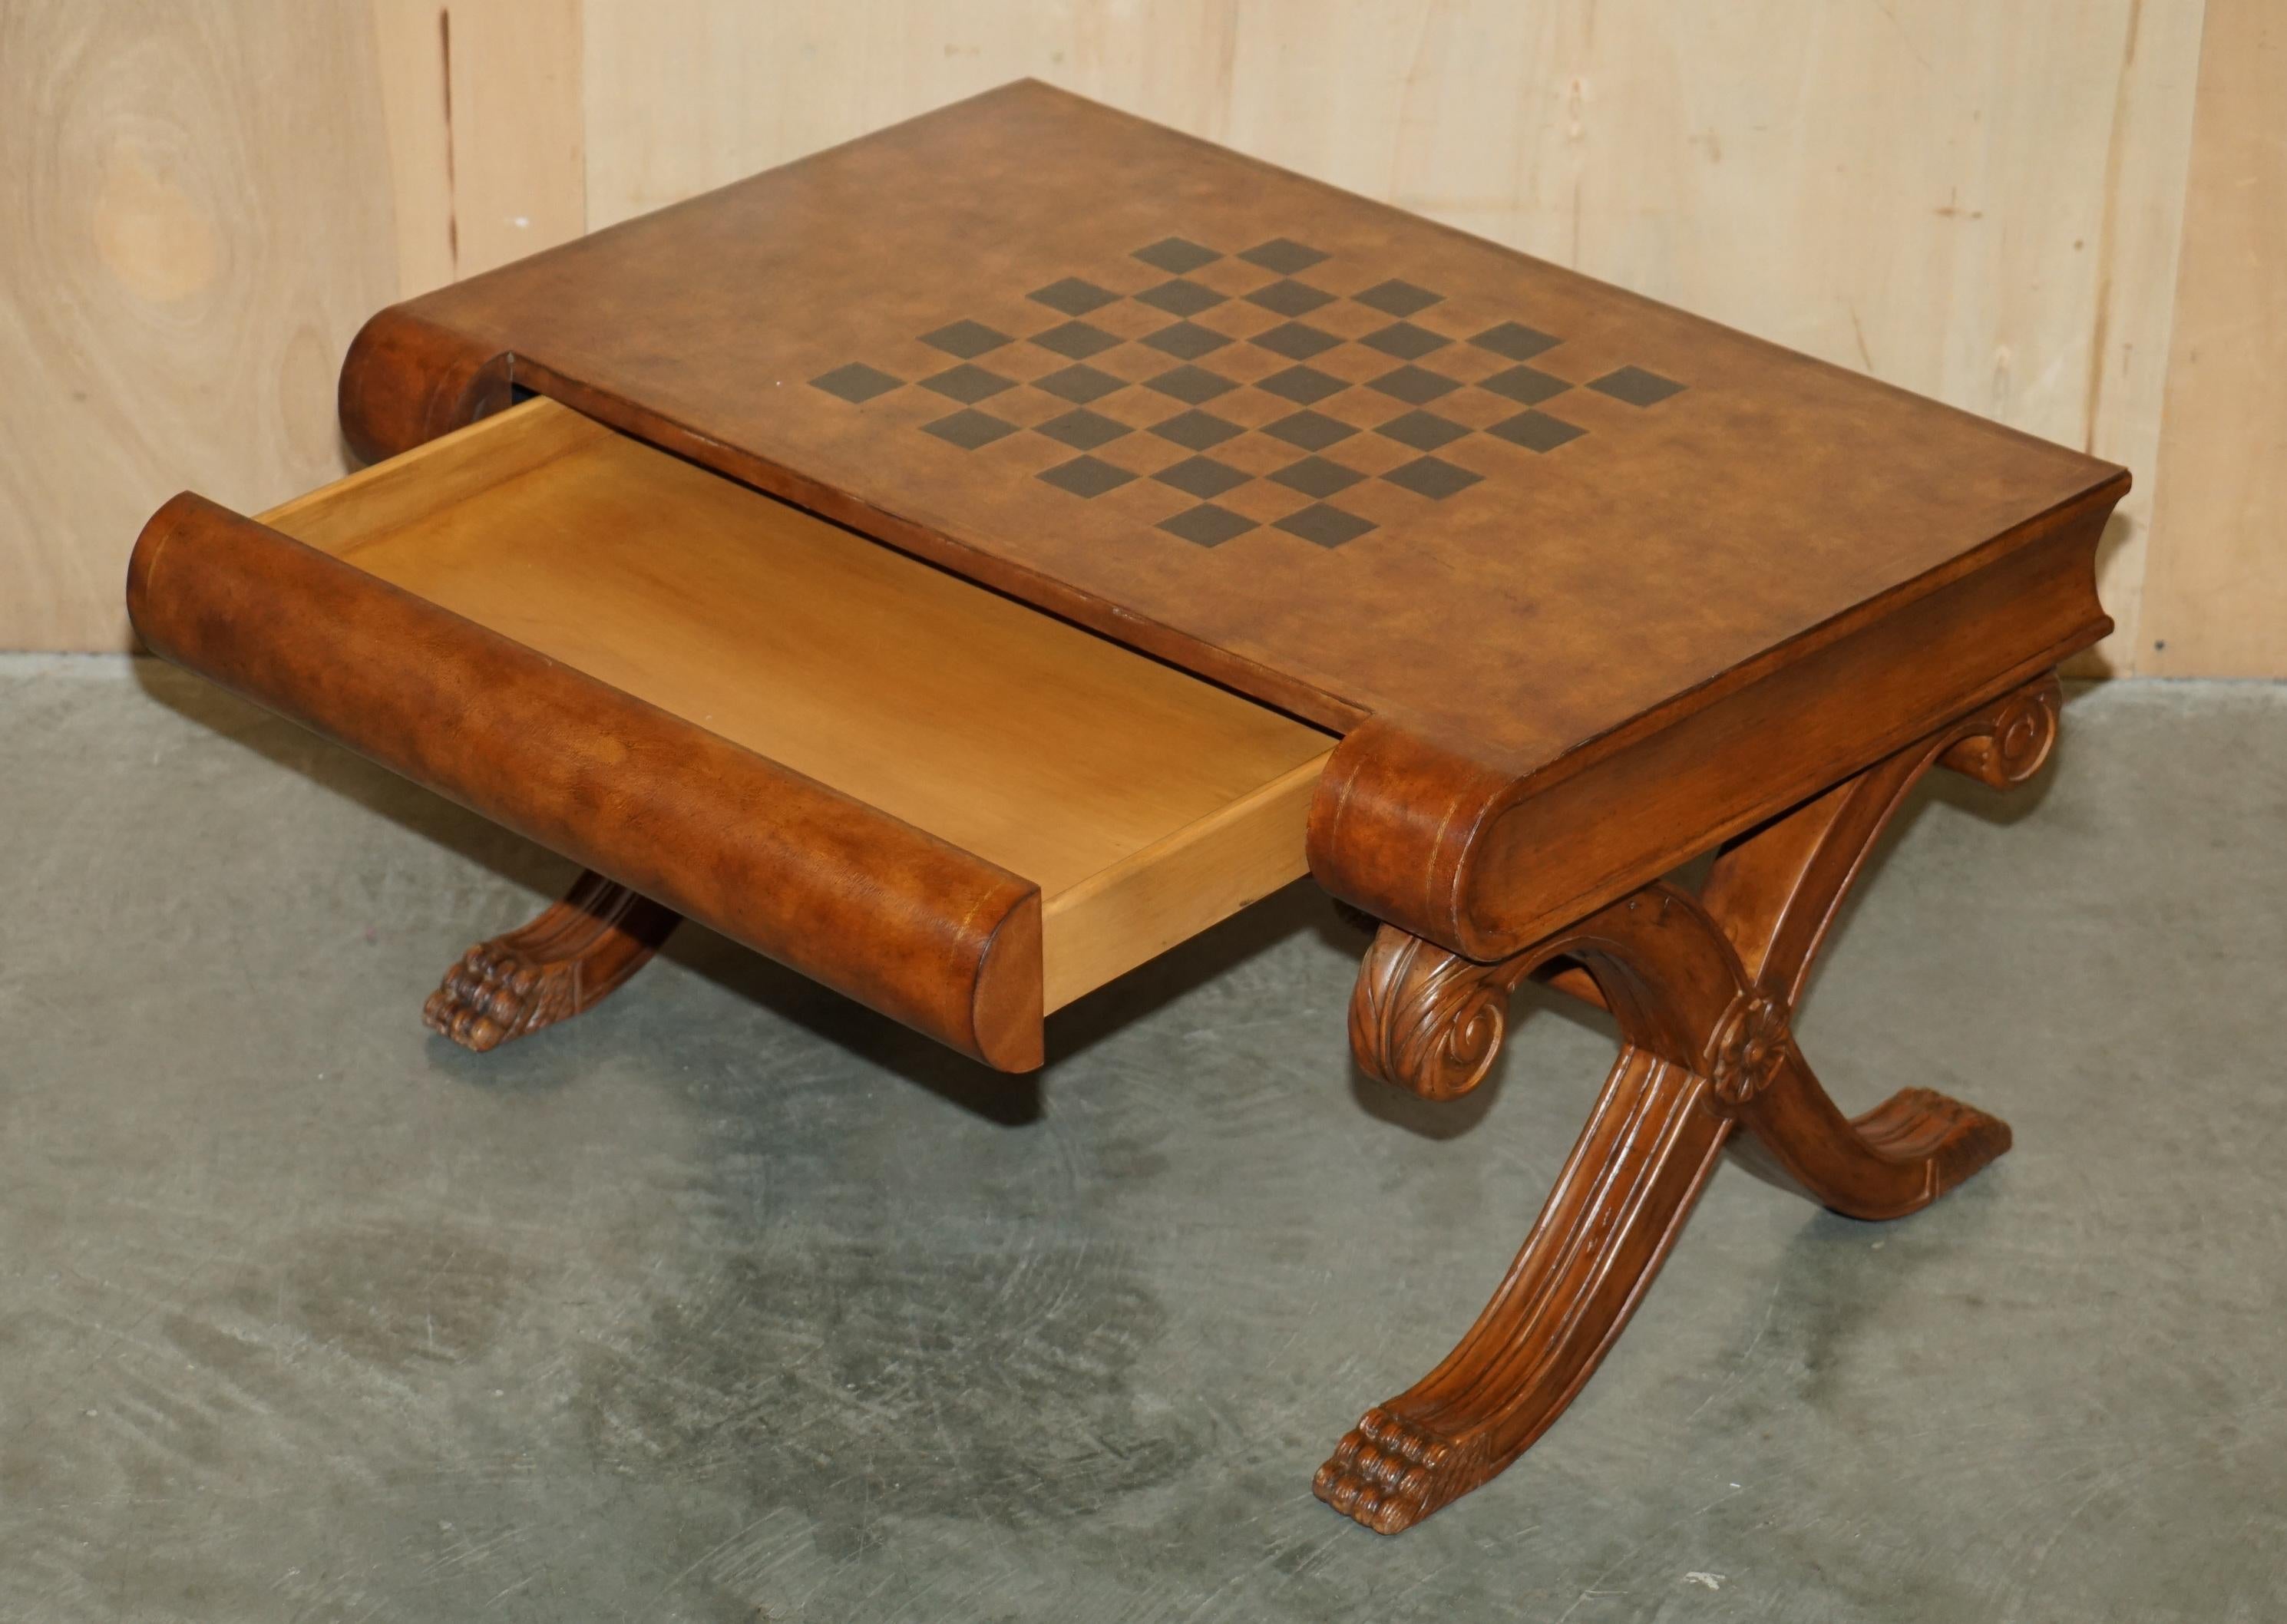 STUNNiNG HAND DYED BROWN LEATHER SCHOLARS BOOK CHESSBOARD CHESS COFFEE TABLE For Sale 8